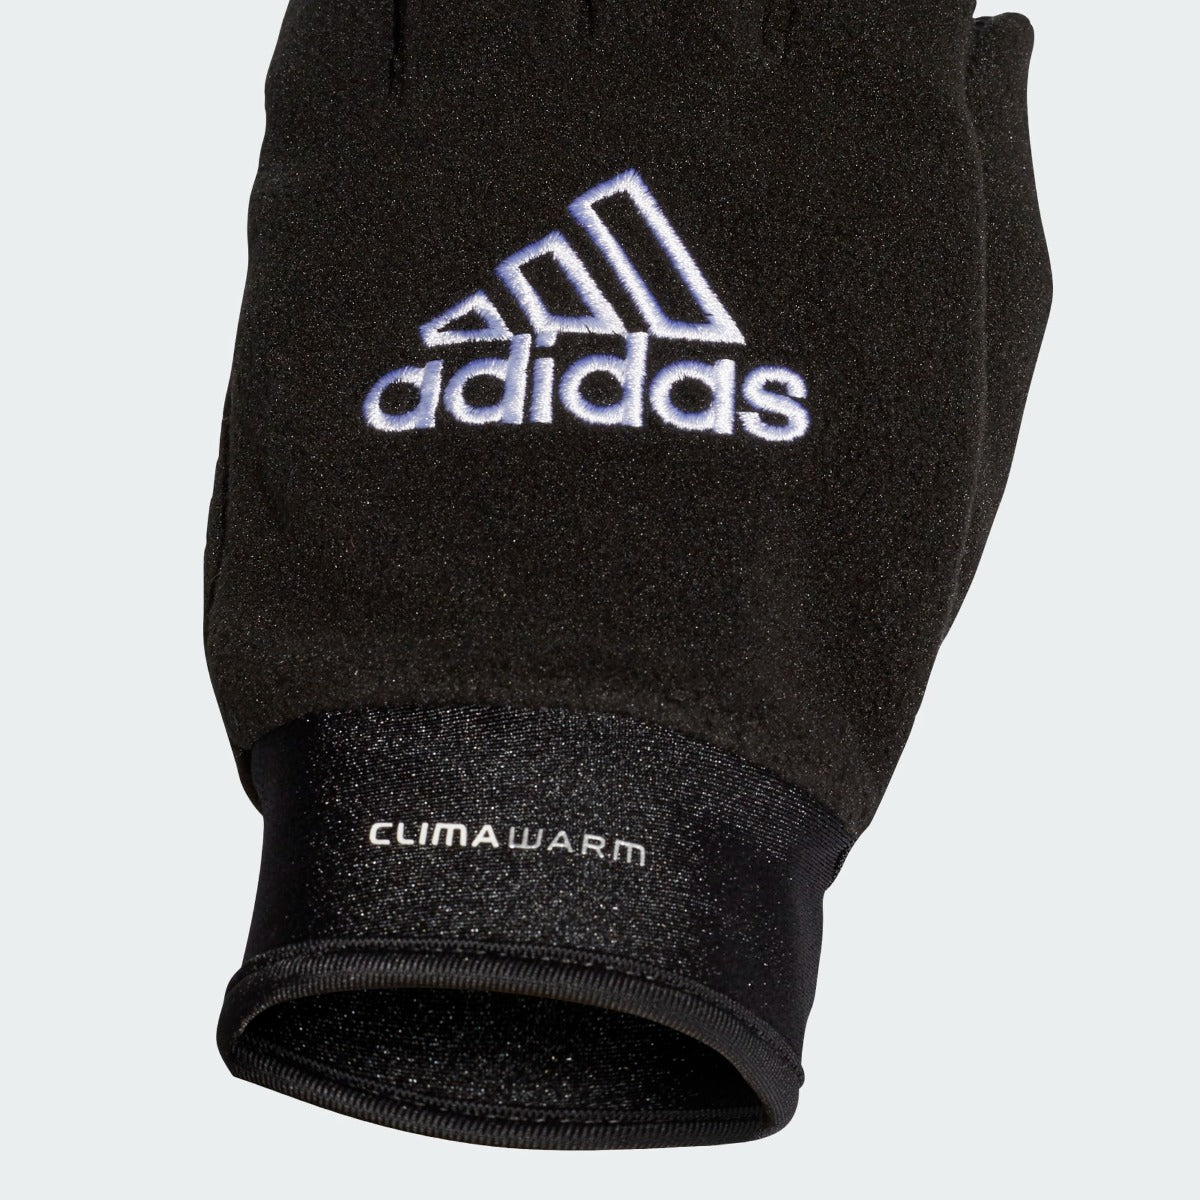 Adidas Field Players Gloves - Black (Detail 1)